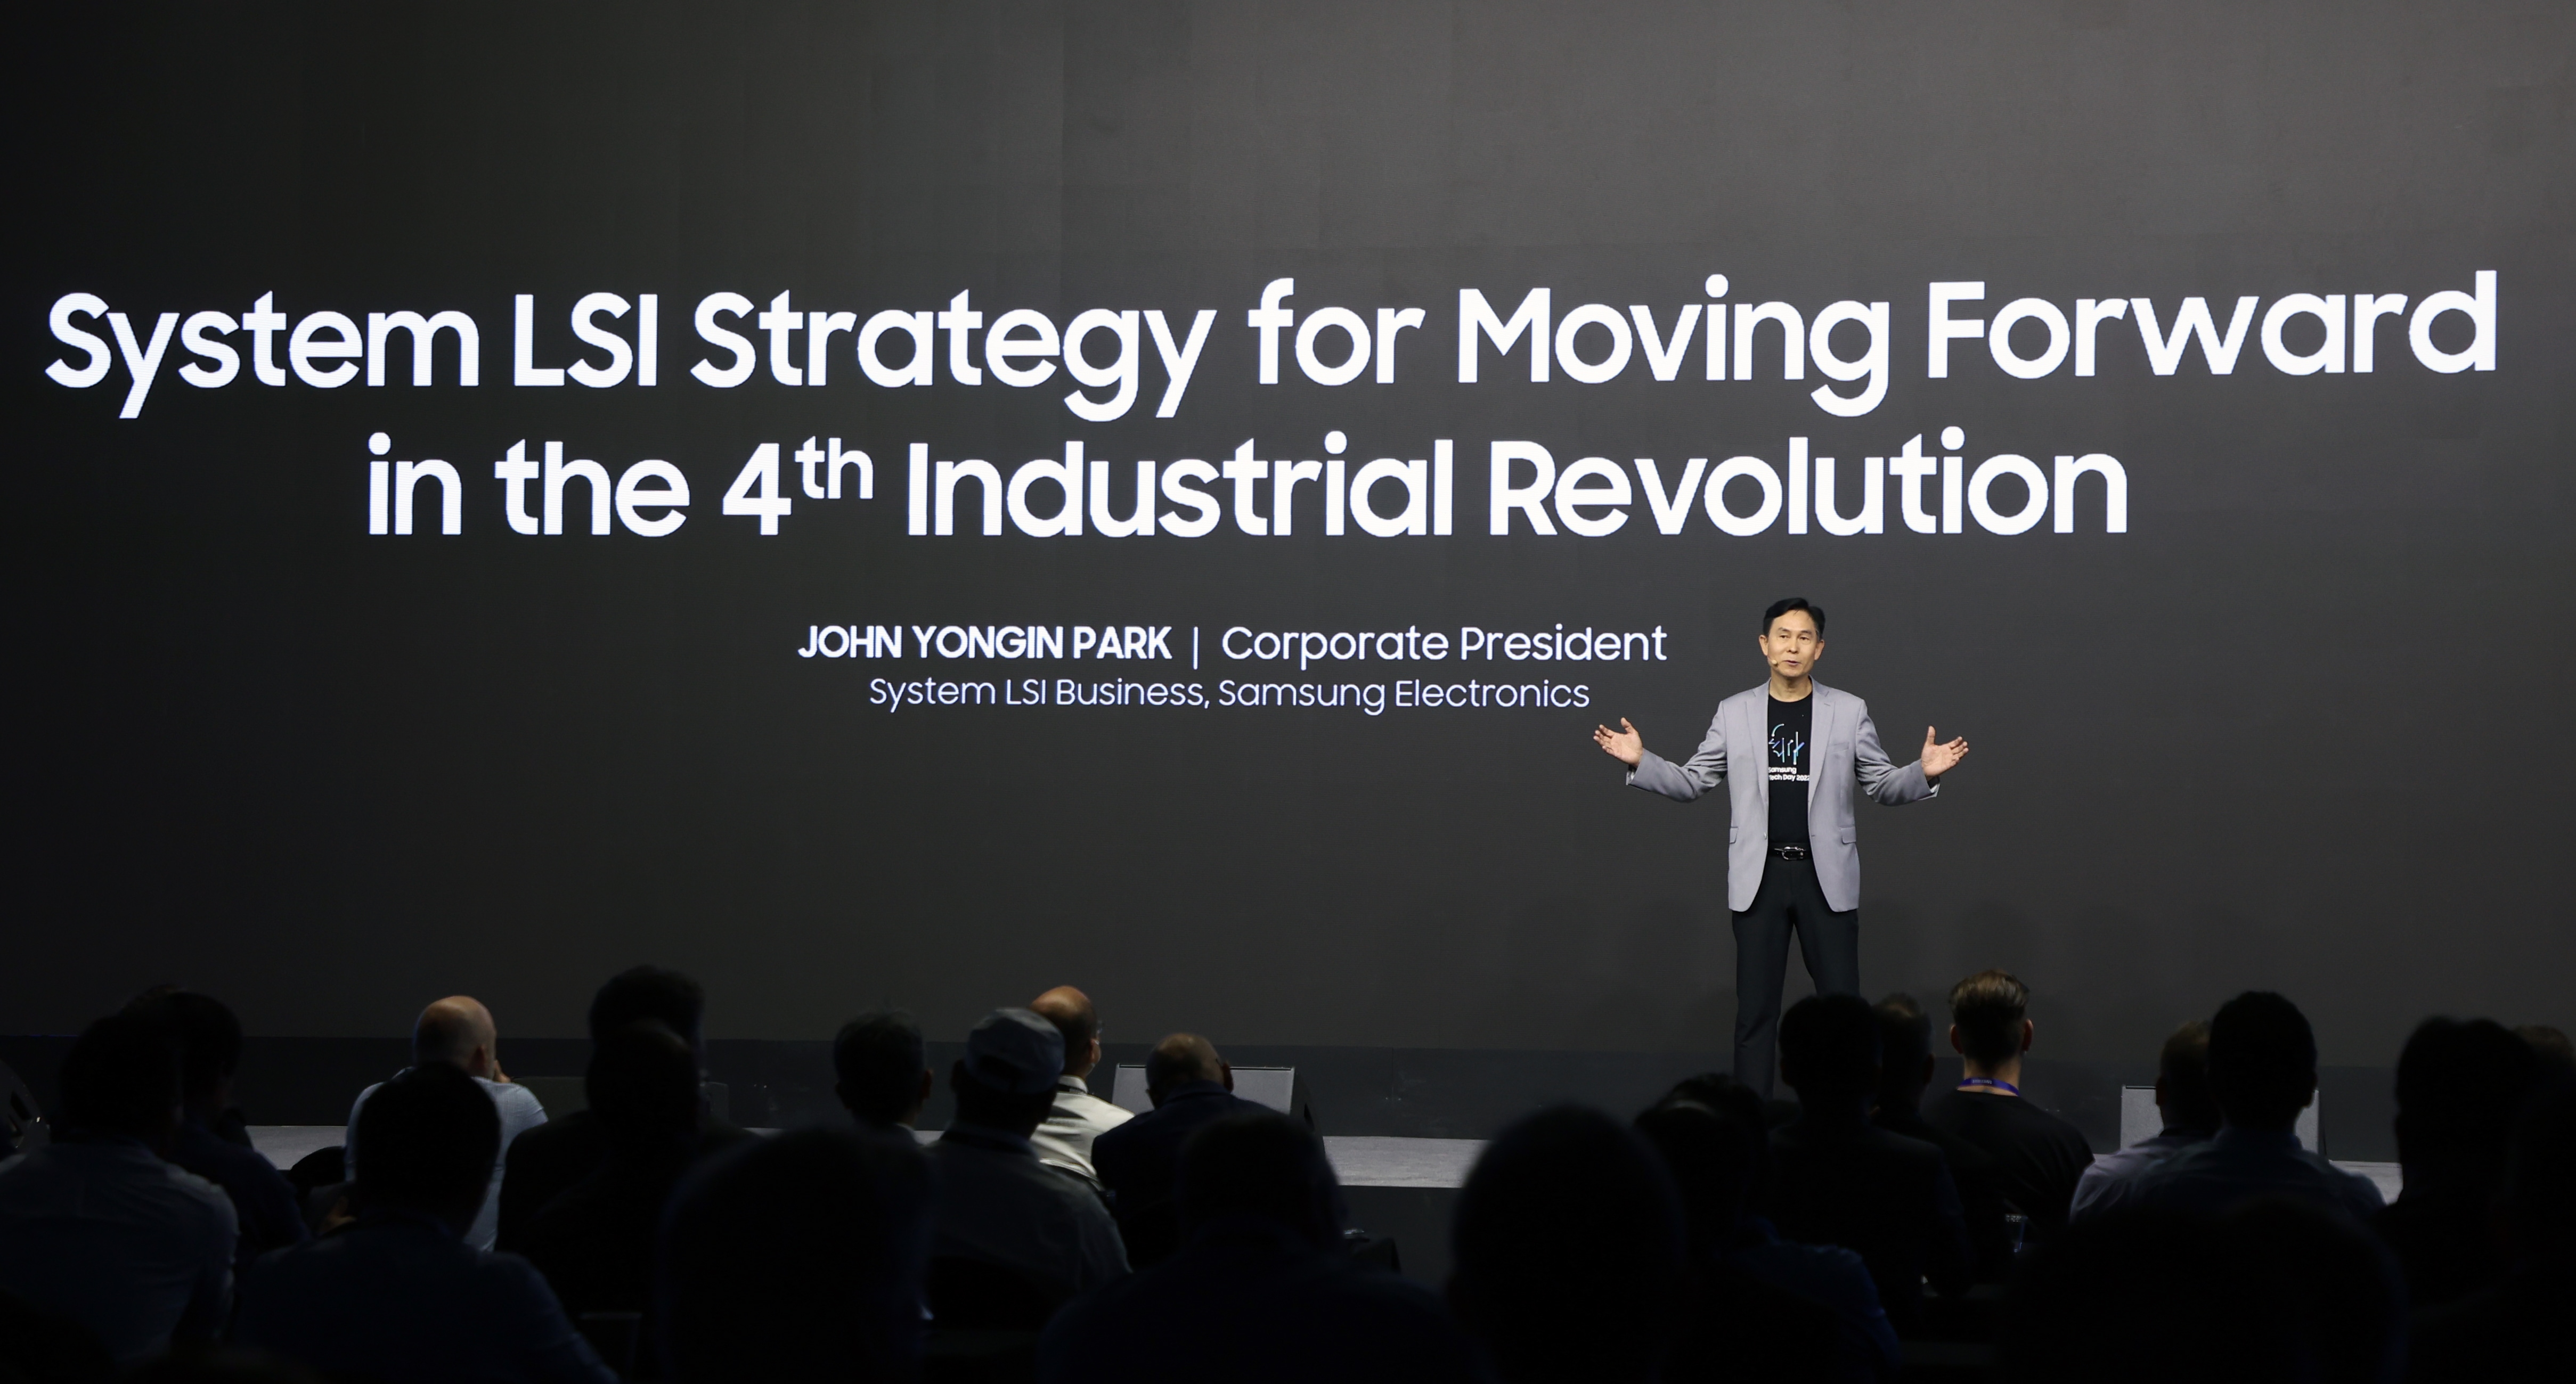 This picture was taken in the back of the lecture hall about Yong-in Park, head of System LSI Business Division, giving a keynote speech at Samsung Tech Day 2022.